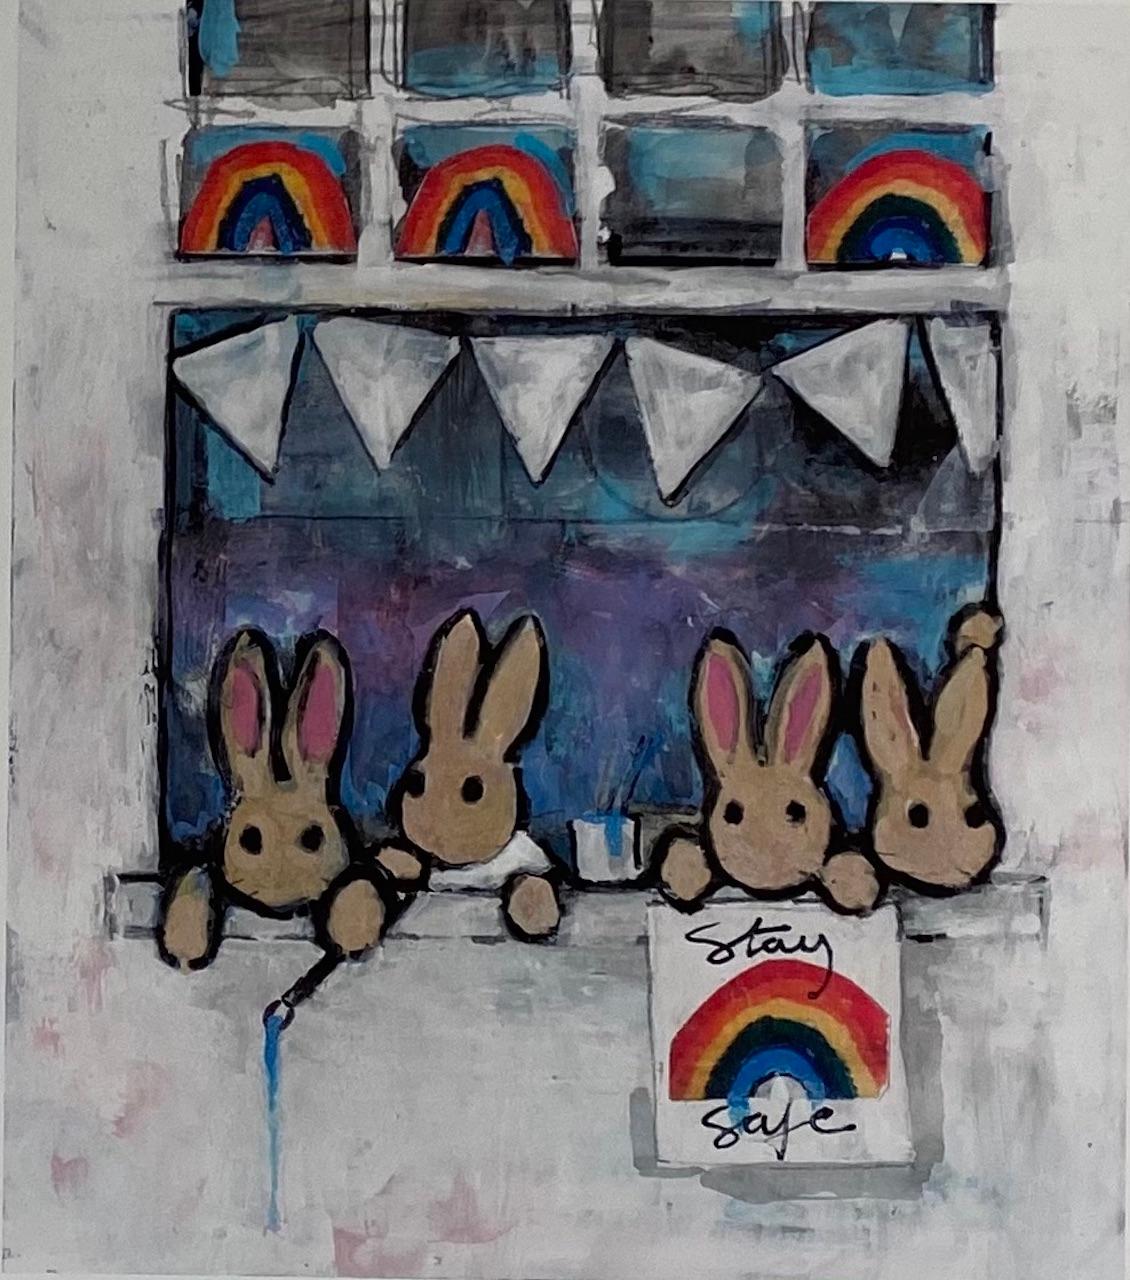 Home Skooling By Harry Bunce [2020]

Home Skooling is a limited edition print by Harry Bunce. This fun and endearing print depicts a group of rabbits staying home during lockdown. Please note that the complete size of unframed work is the sheet size